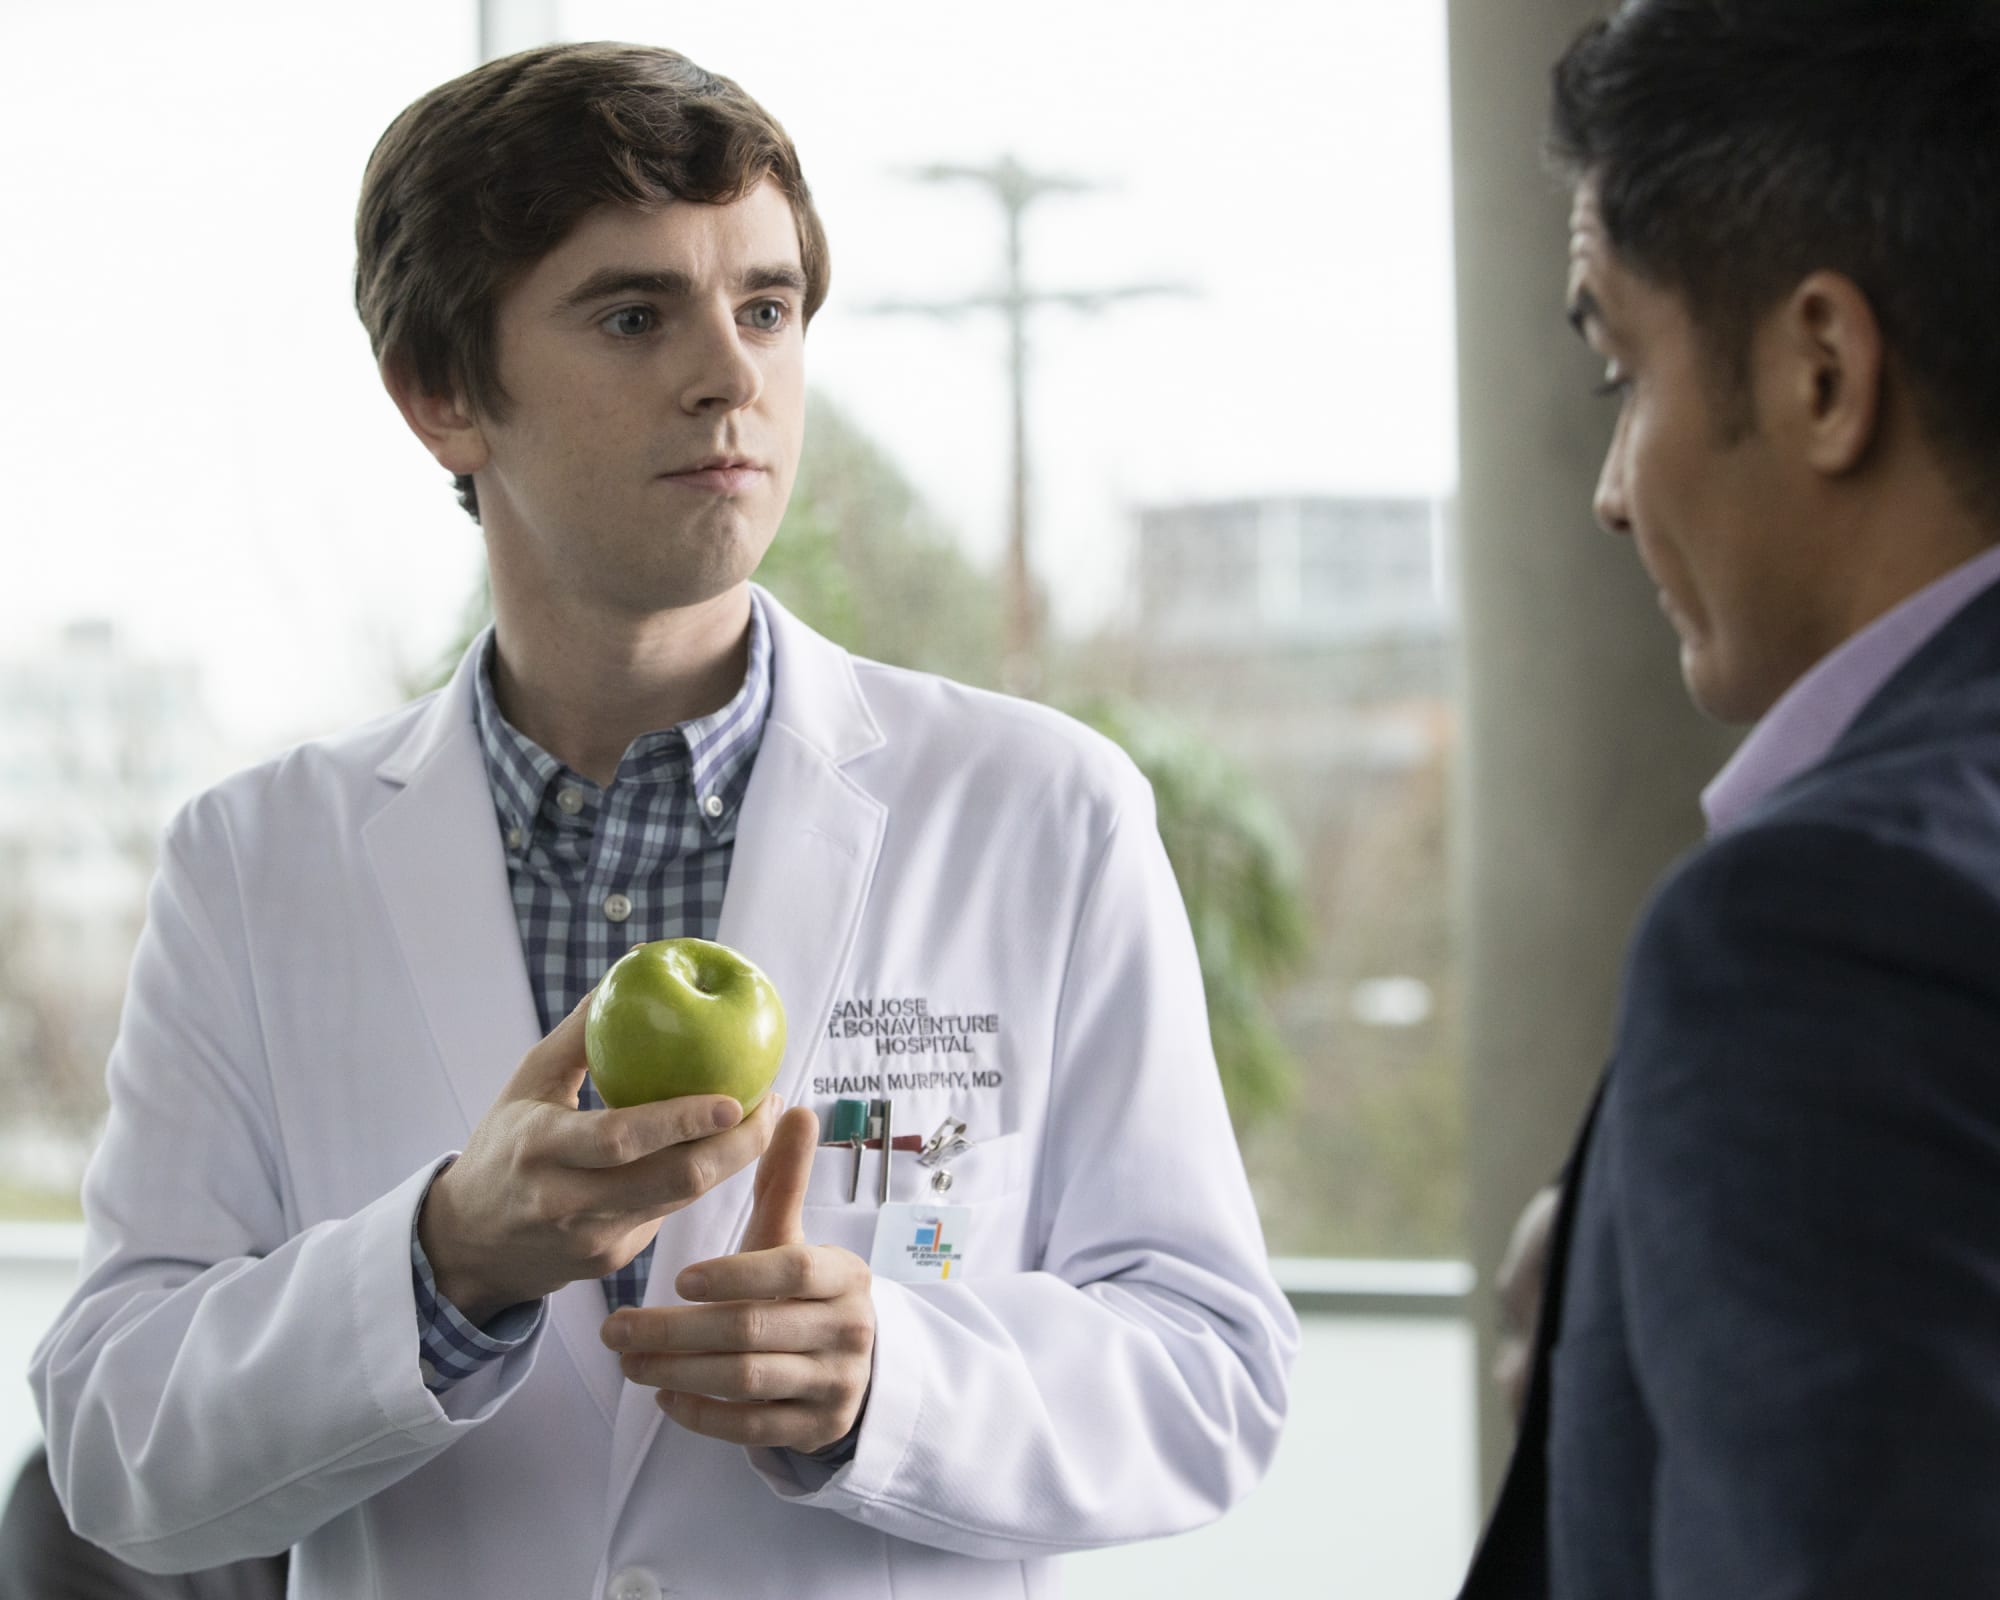 When is The Good Doctor coming back in 2020 on ABC?